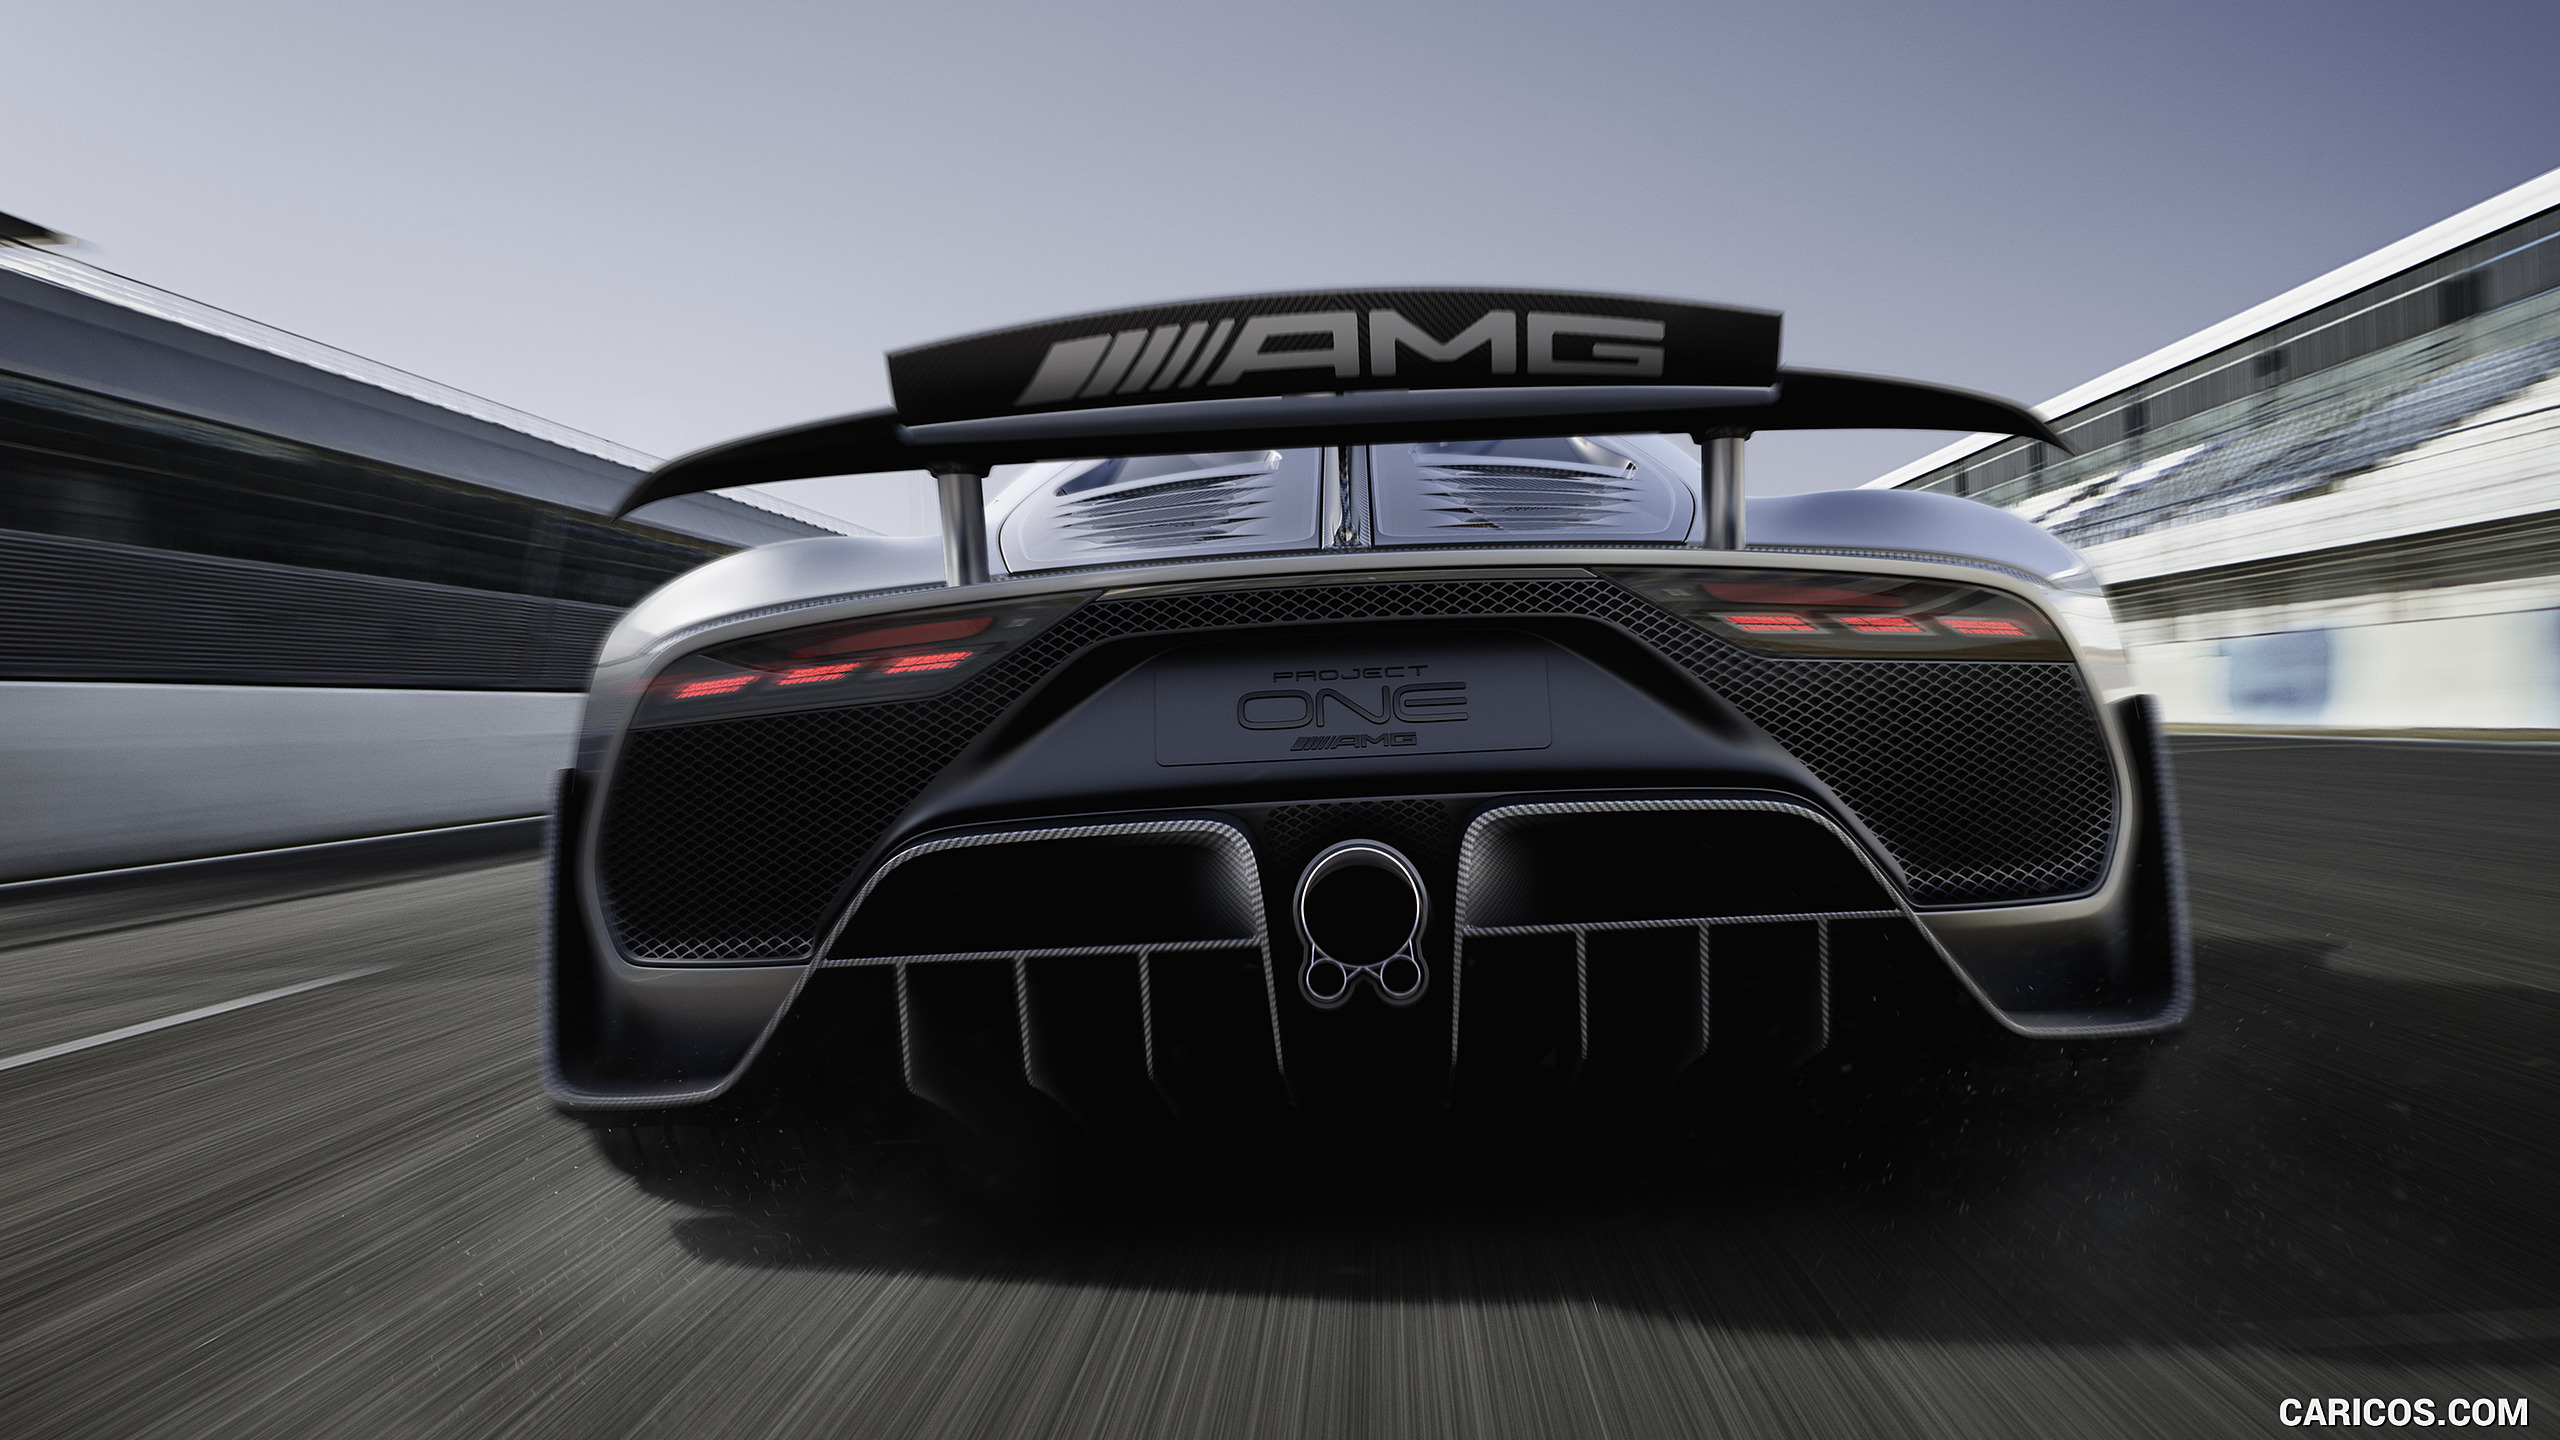 2017 Mercedes-AMG Project ONE - Rear, #8 of 13